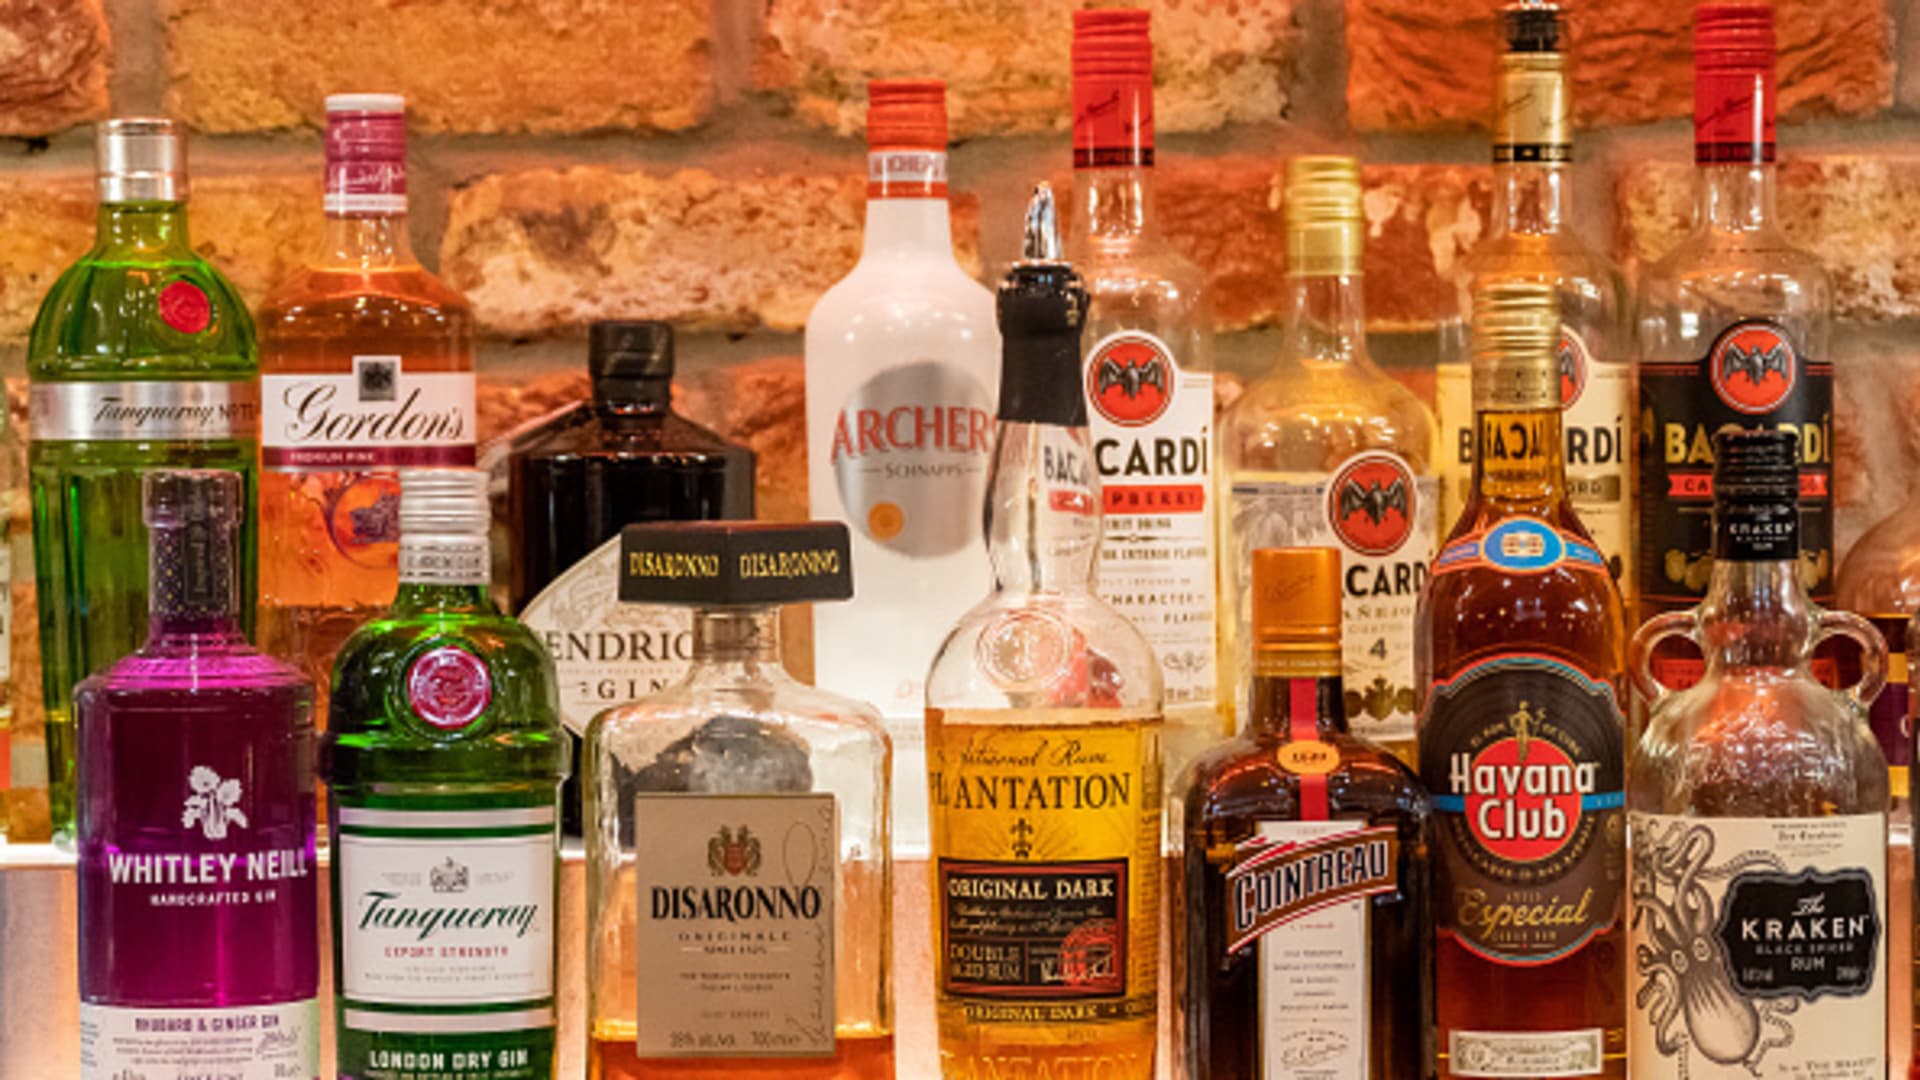 Spirits sales beat out beer and wine for second straight 12 months, despite little growth